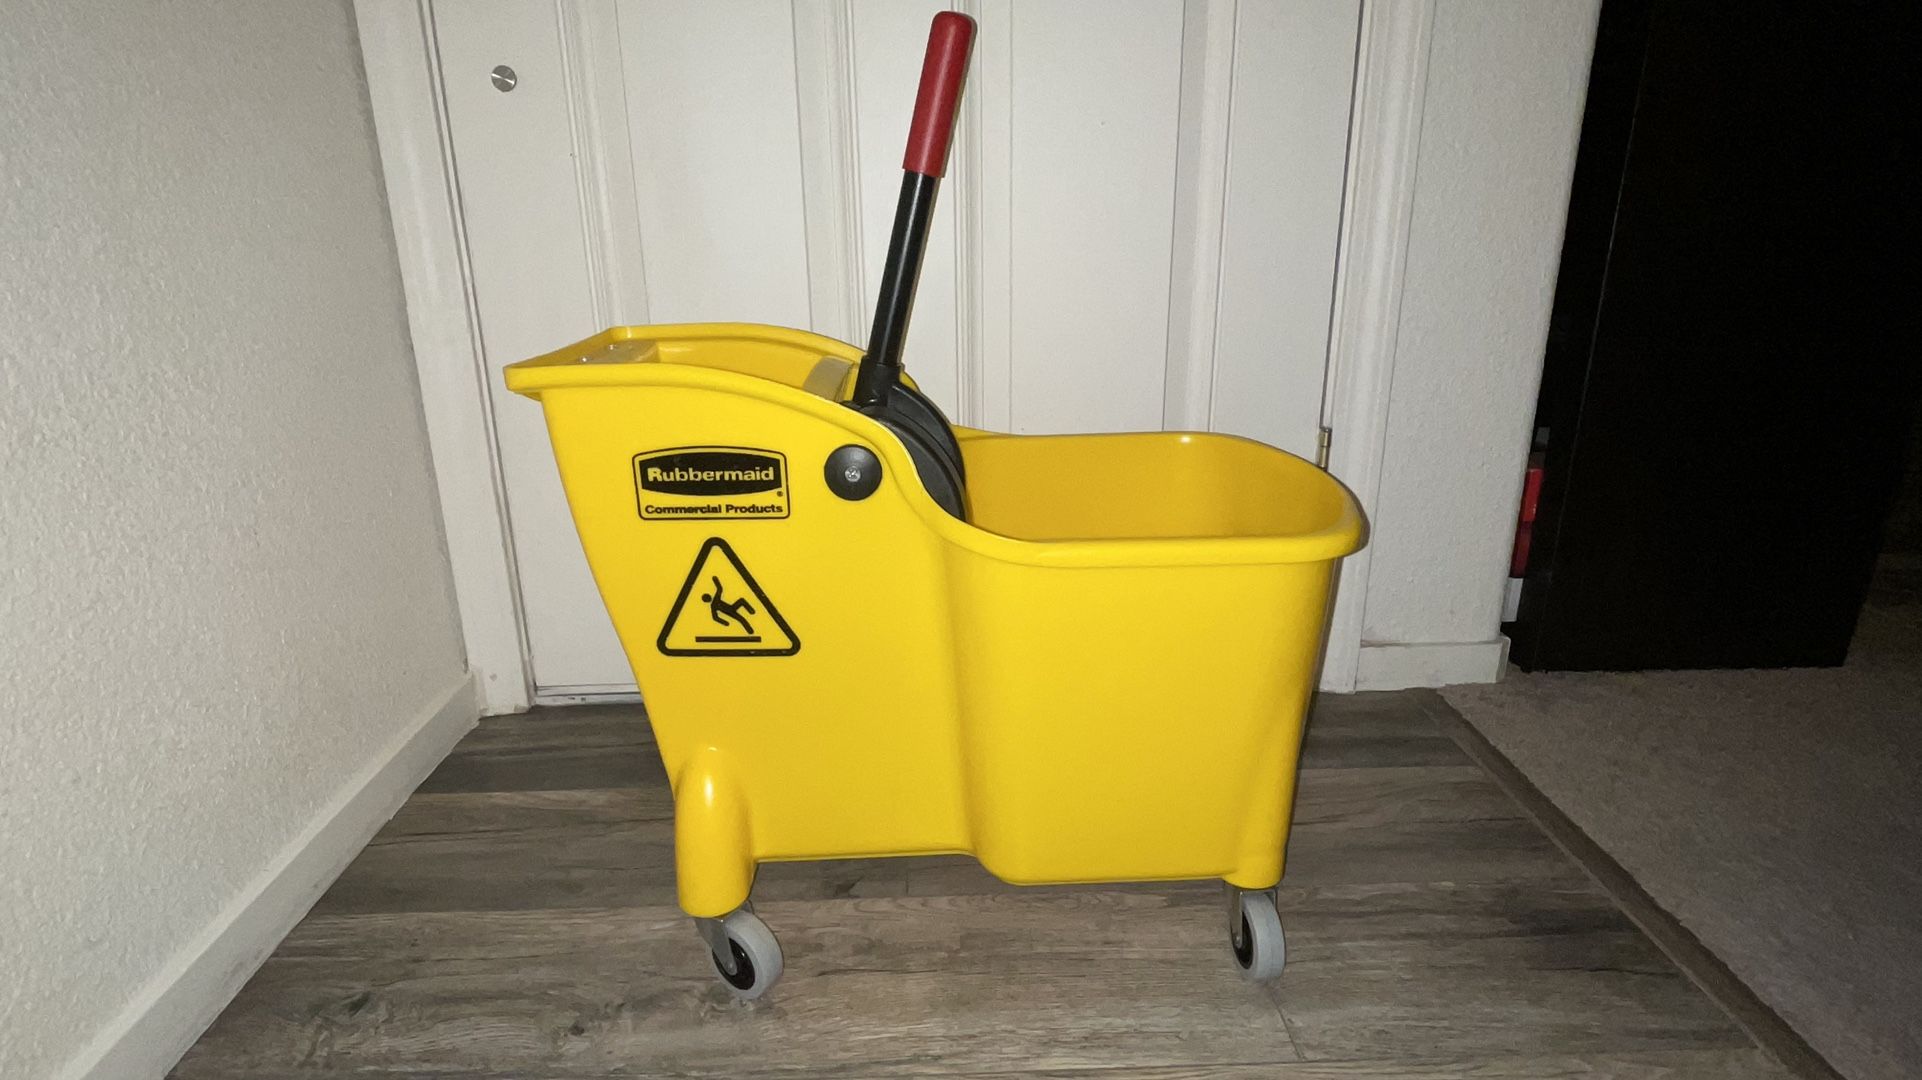 RUBBERMAID COMMERCIAL PRODUCTS TANDEM MOP BUCKET - NEW